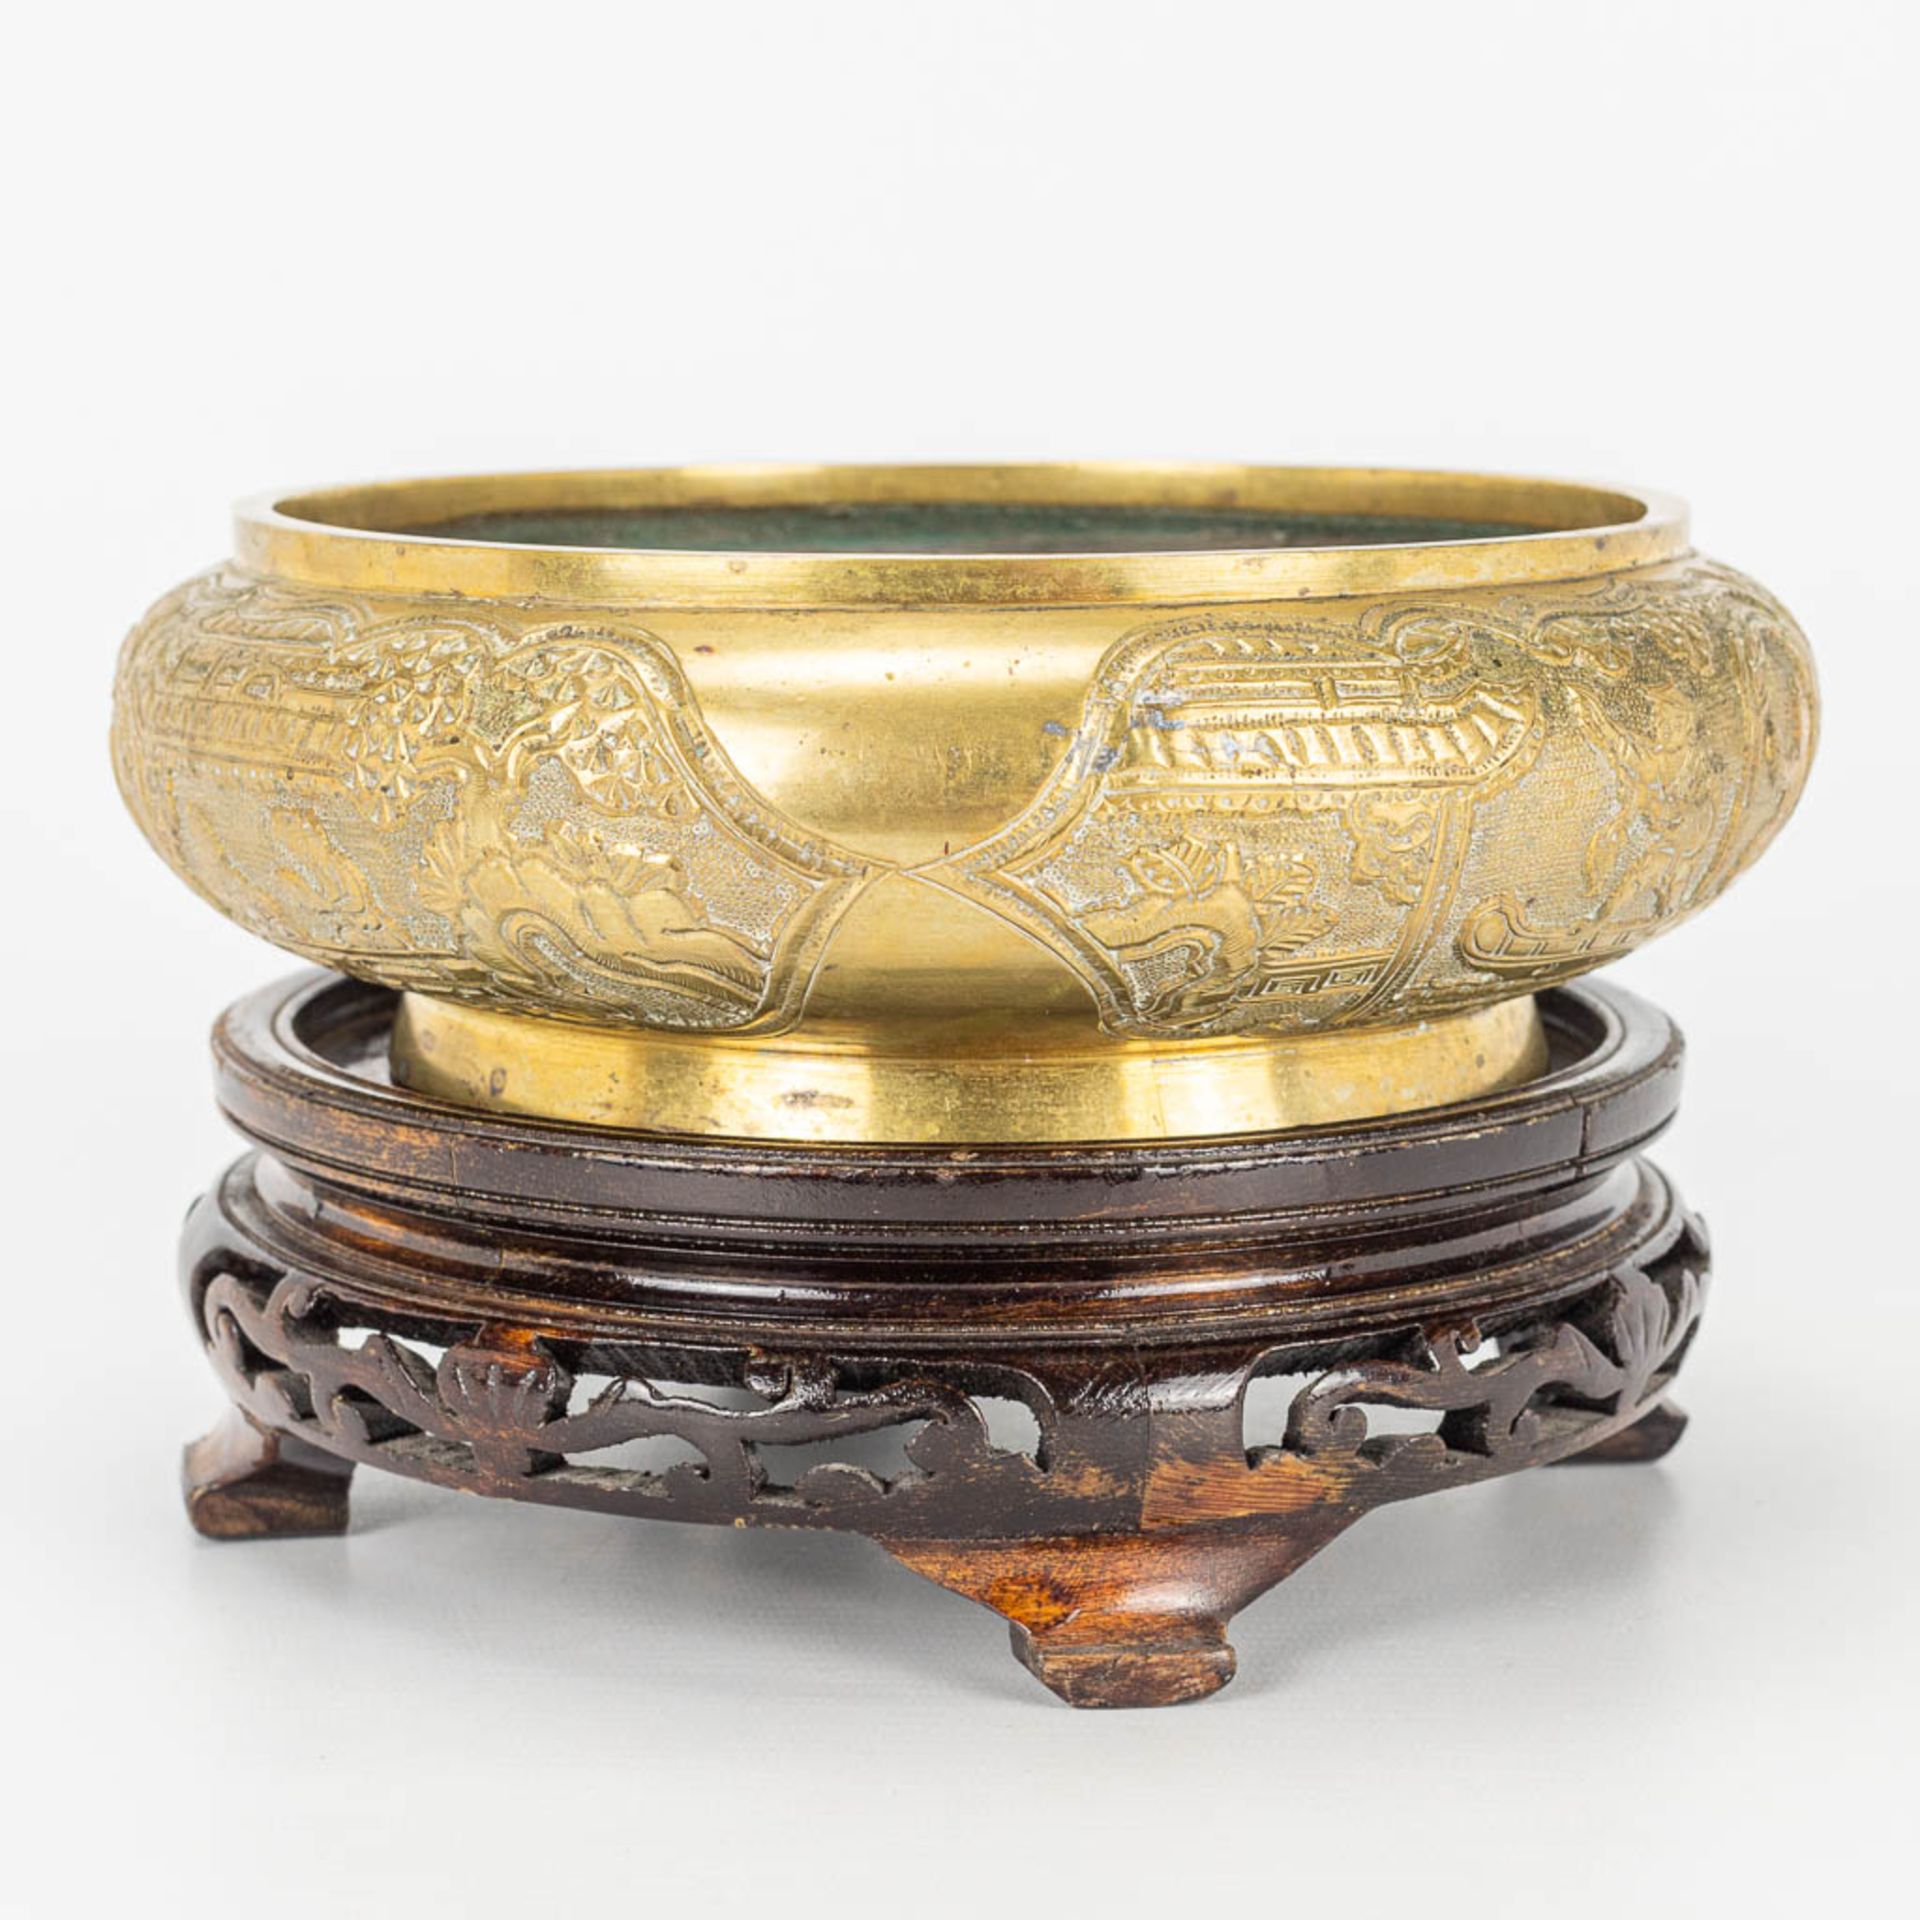 A bronze bržle parfum bowl, on a wood base. Marked Xuande. - Image 7 of 14